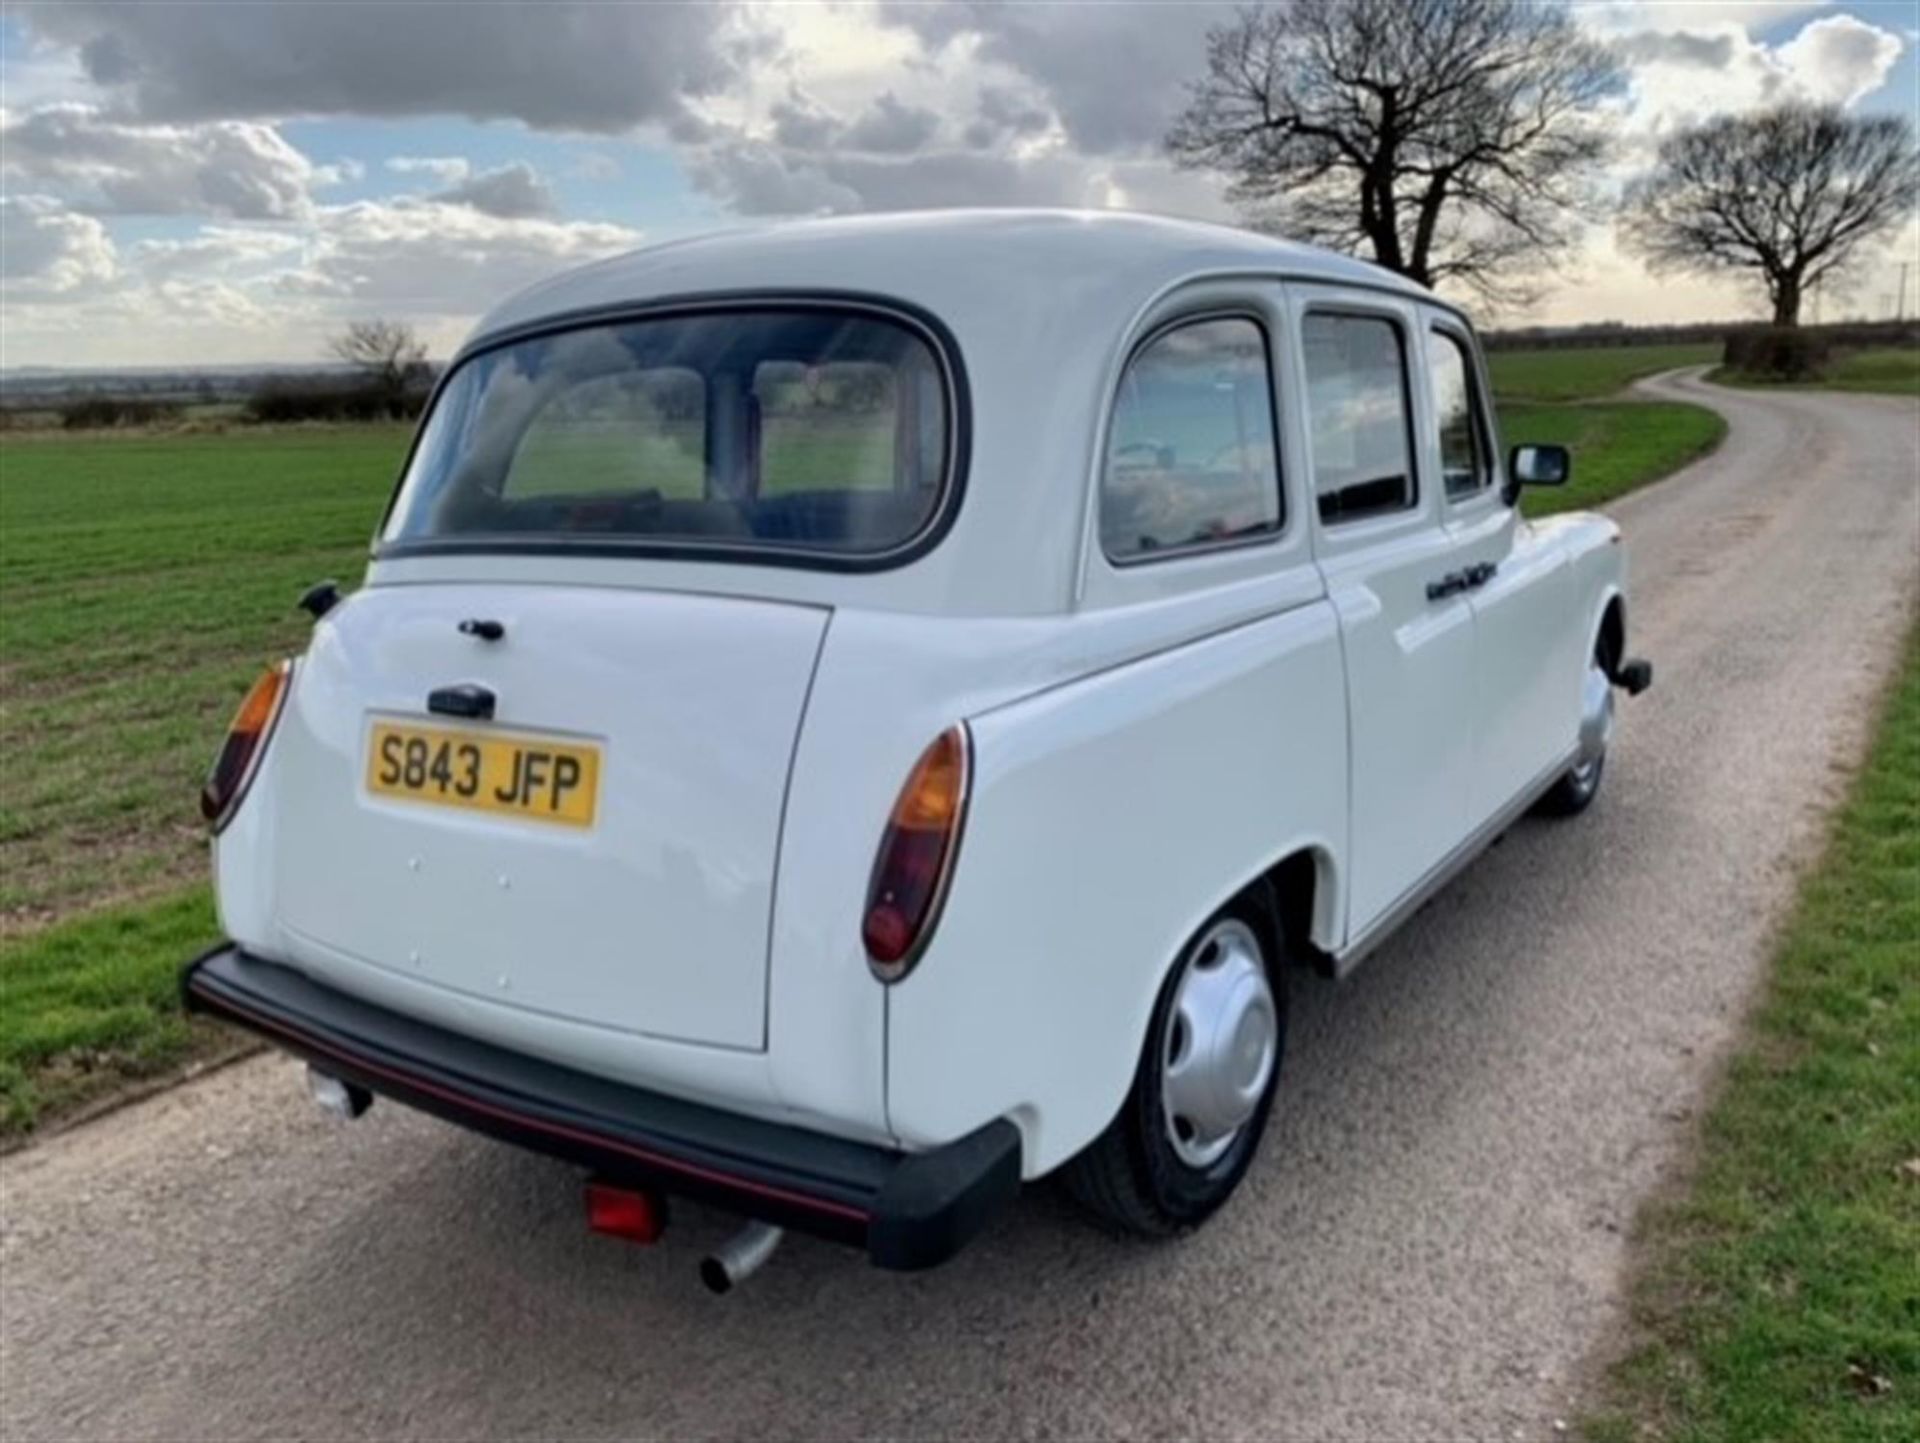 1999 LTI London Fairway taxi (Just 1,993 miles from new) - Image 11 of 12